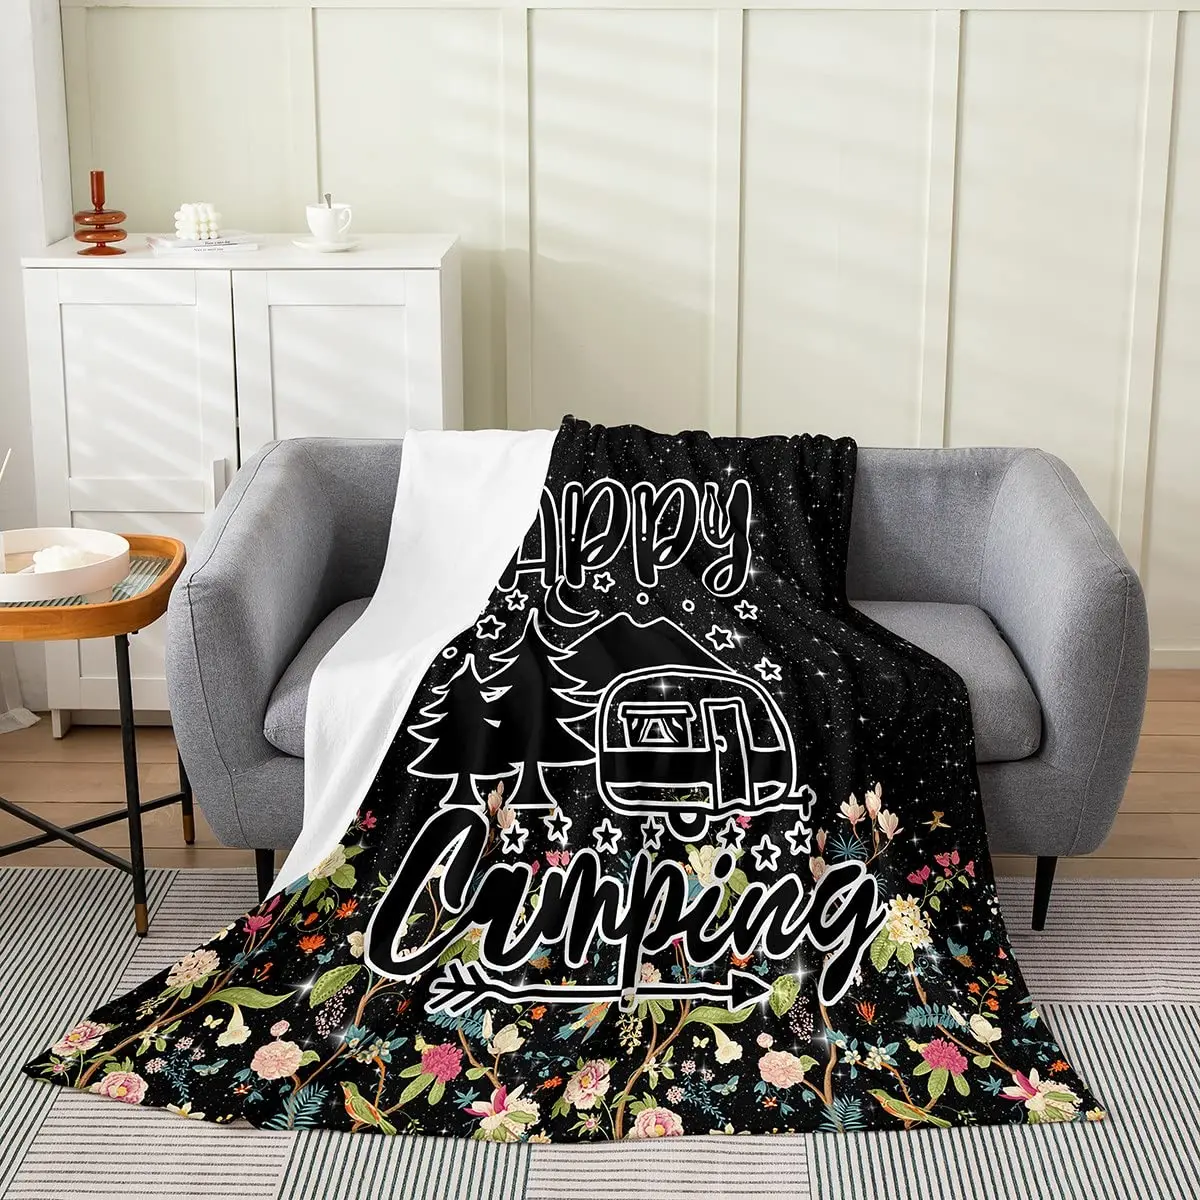 

Happy Camper Blanket Throw Flannel Super Soft Cozy Warm Gifts Blanket for Couch Chair Bed Sofa Office for Teens Camping Blanket